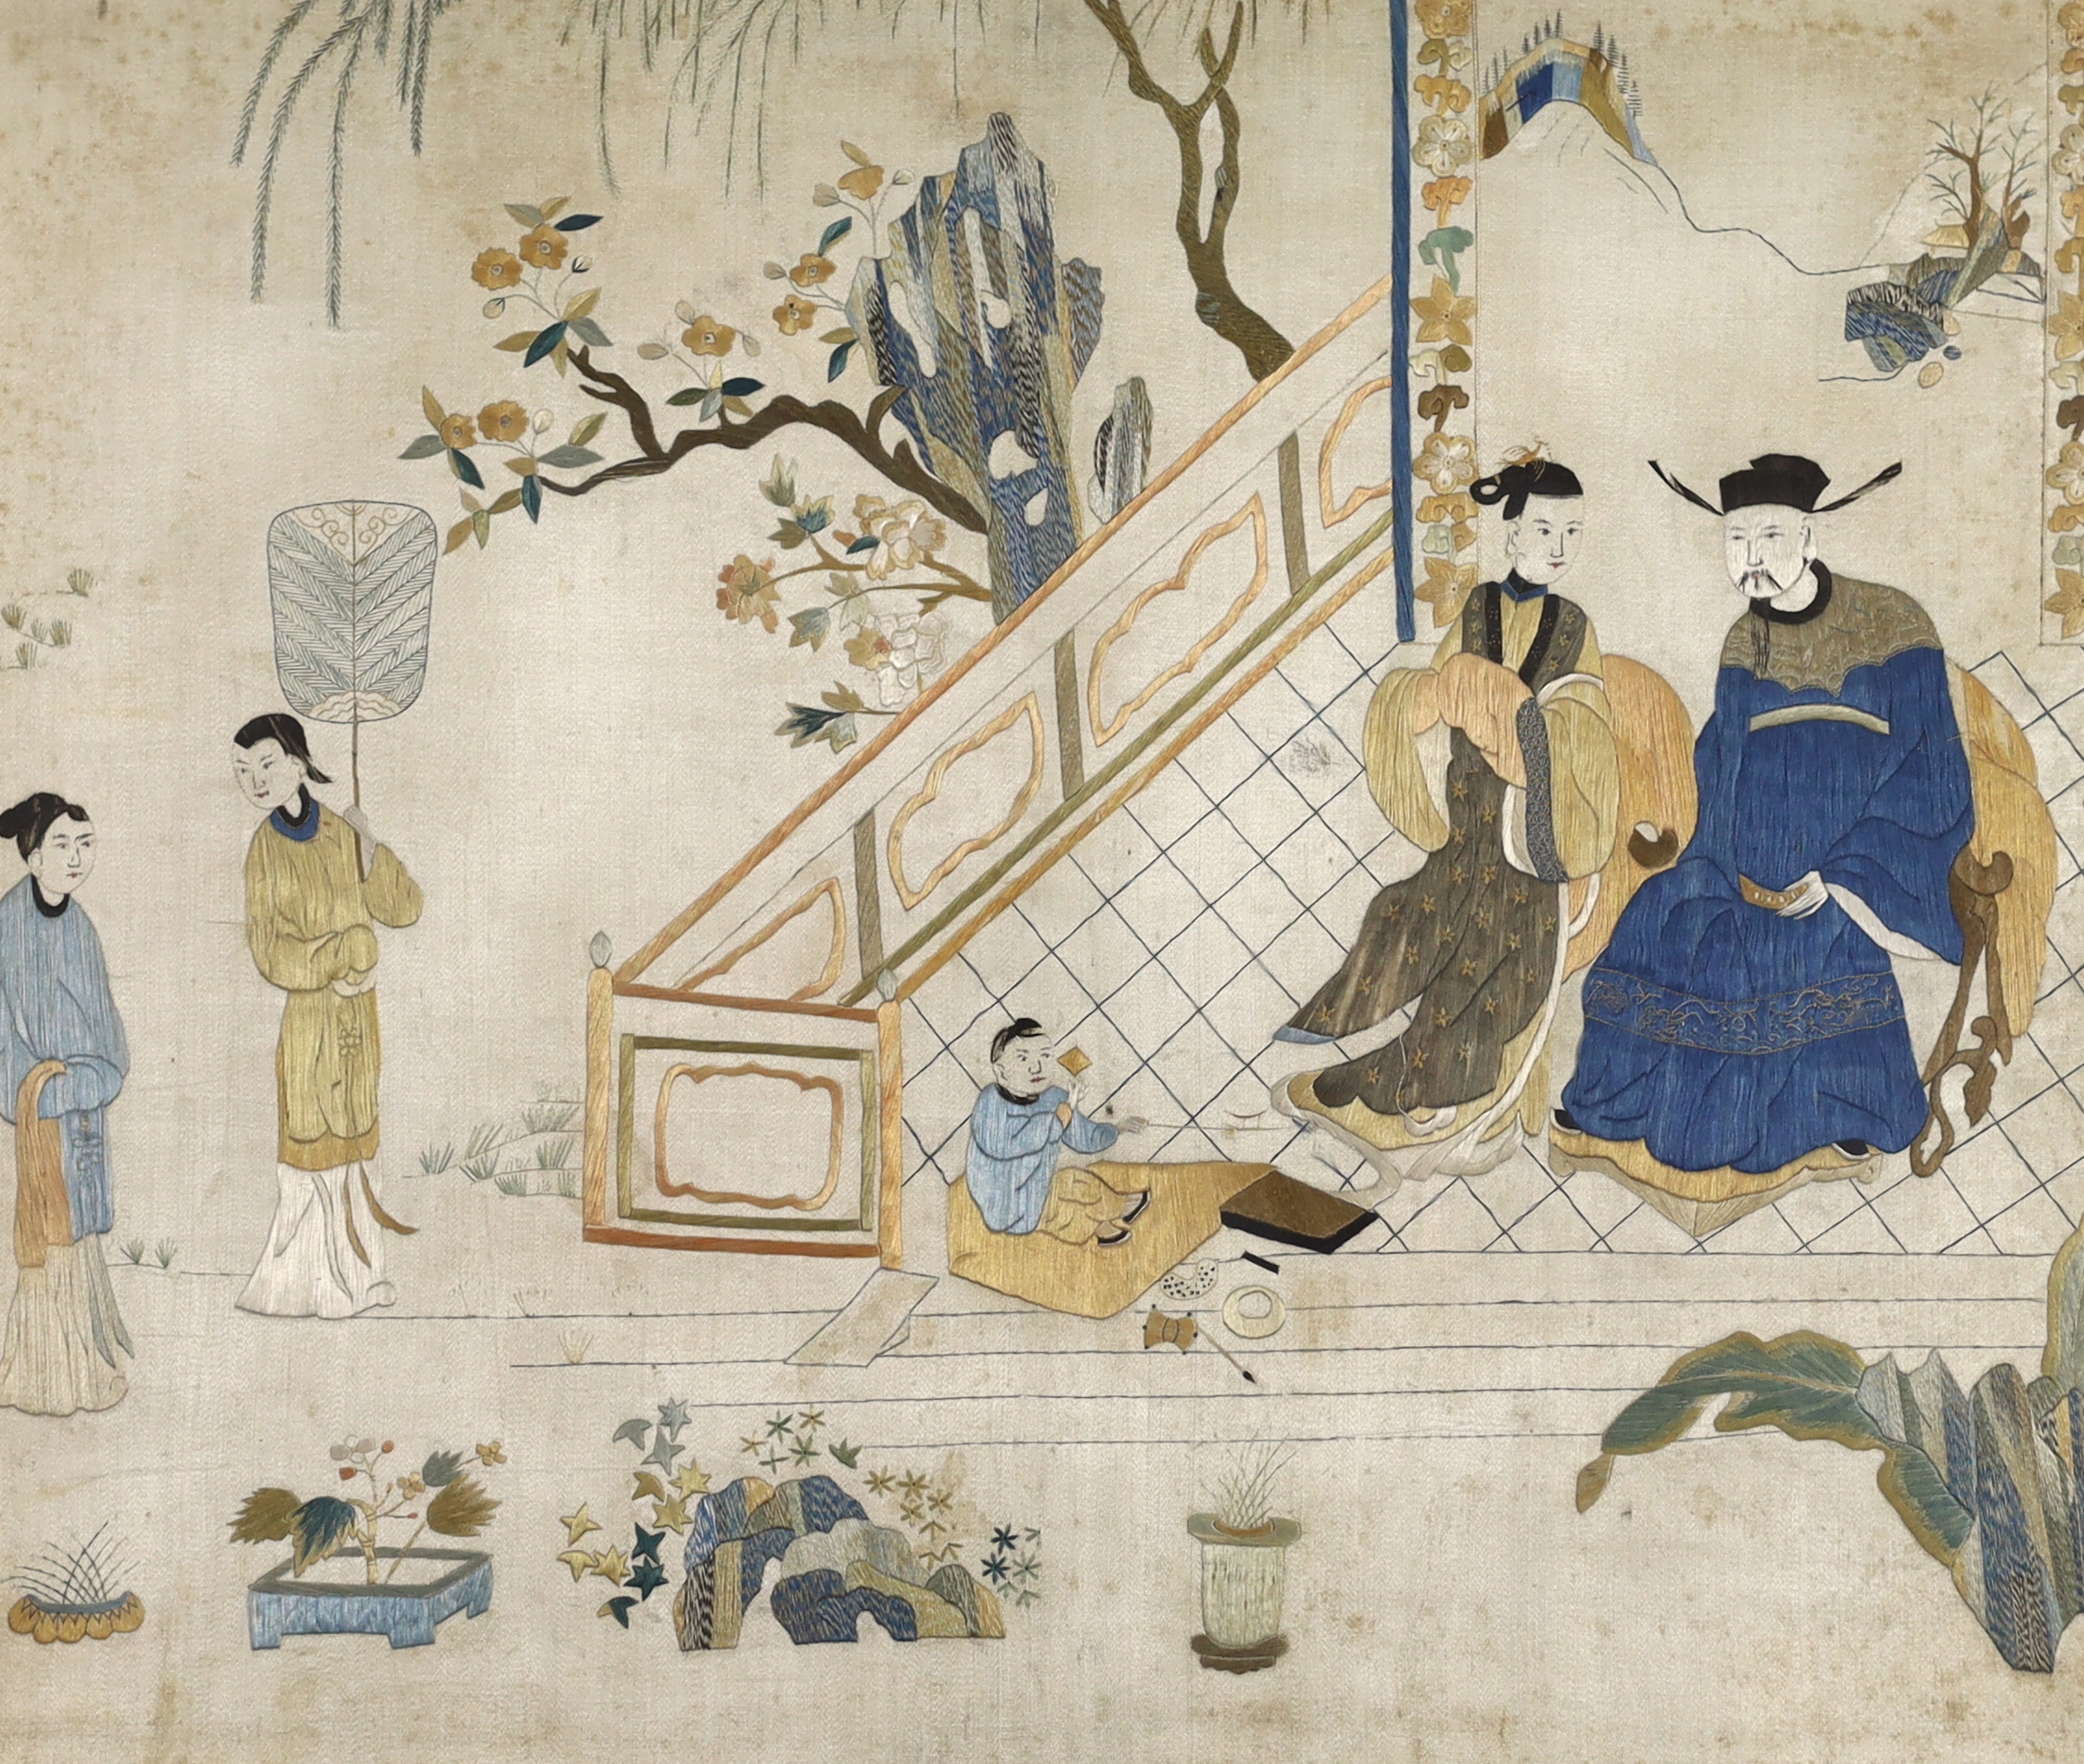 An early 19th century Chinese finely embroidered silk picture, of a nobleman, his wife and child and their attendants. Possibly a court scene. Worked mainly in stem stitch, in golds, blues, greens and white.